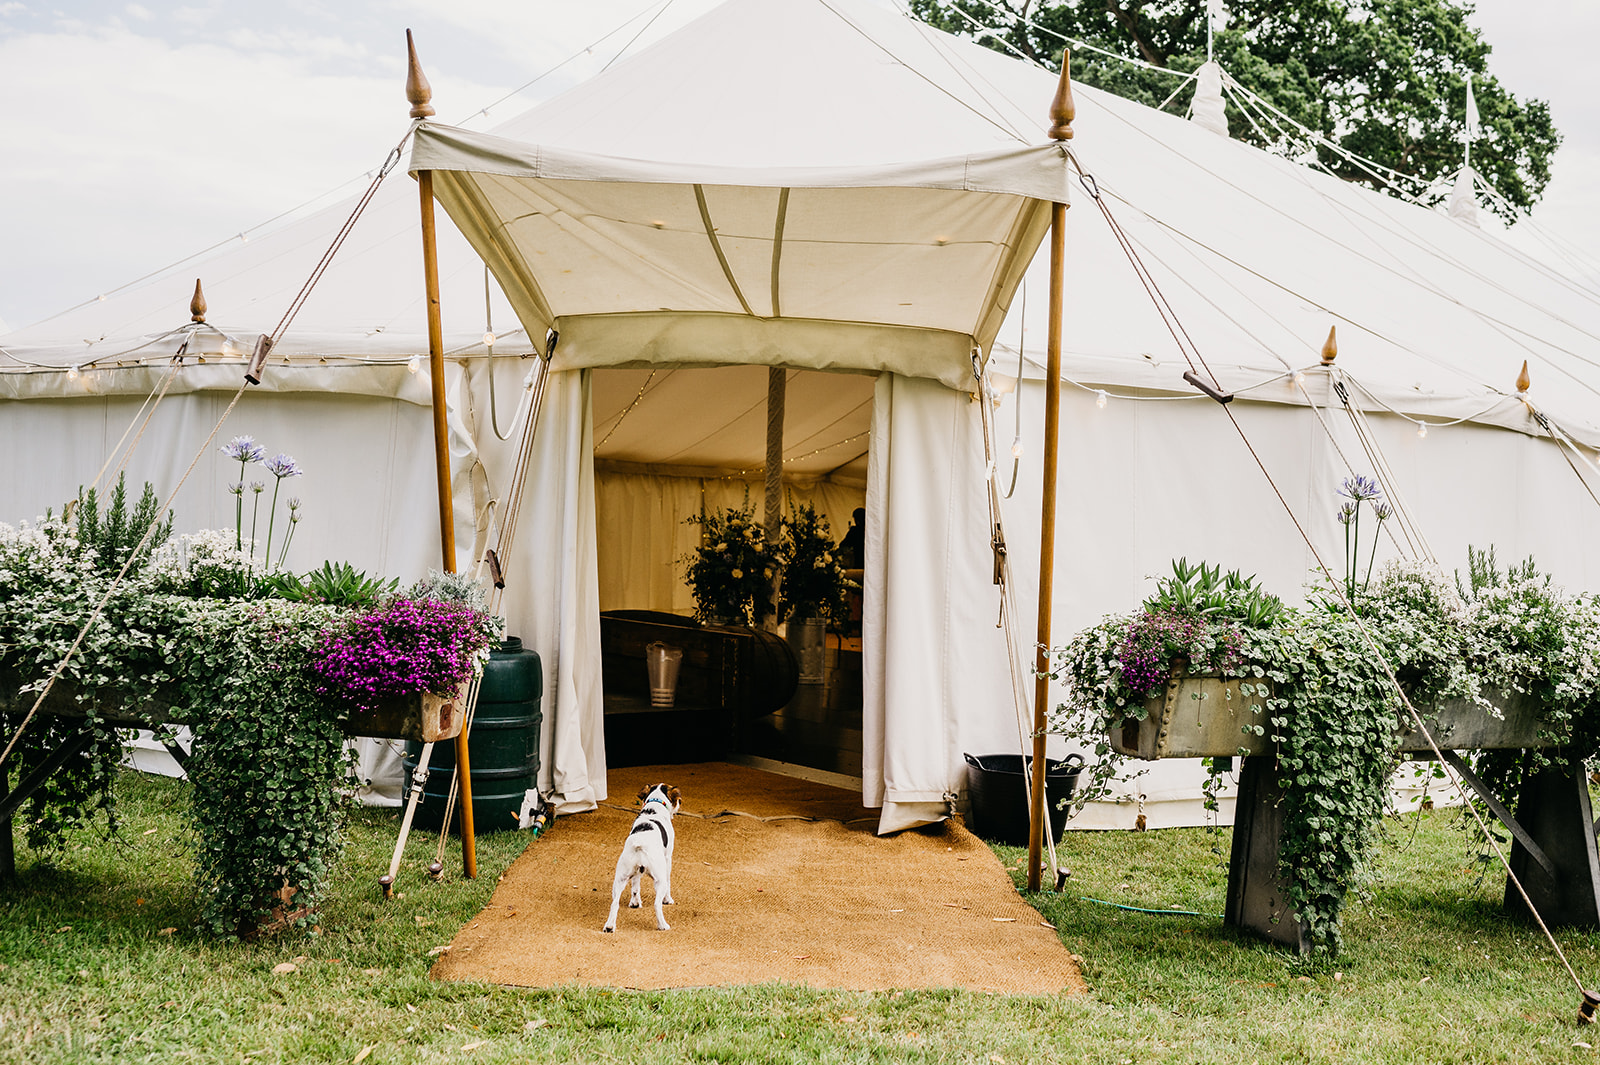 Dog waits by entrance to wedding marquee